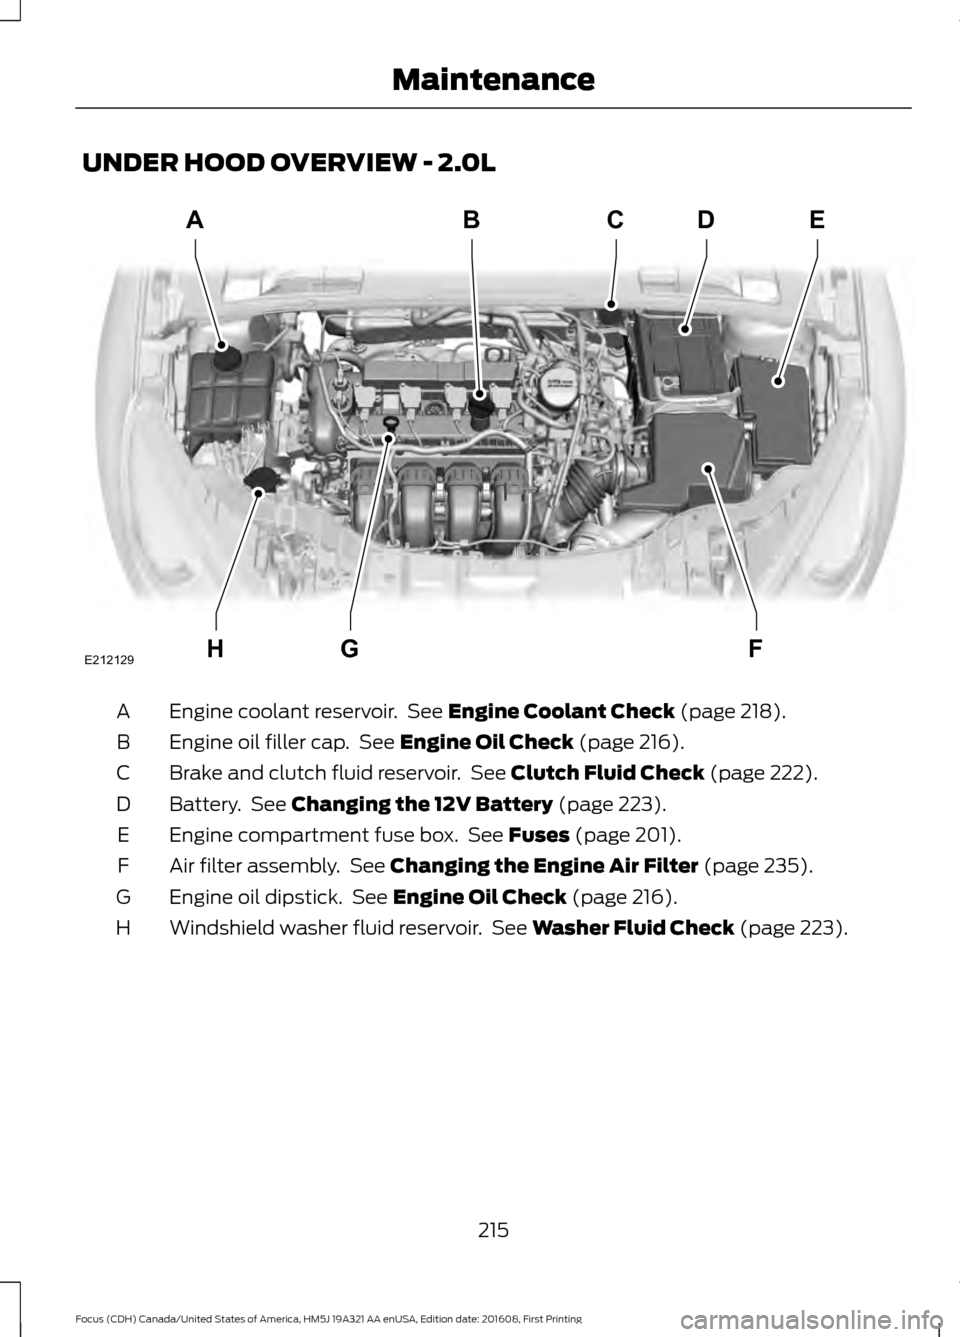 FORD FOCUS 2017 3.G Owners Manual UNDER HOOD OVERVIEW - 2.0L
Engine coolant reservoir.  See Engine Coolant Check (page 218).
A
Engine oil filler cap.  See 
Engine Oil Check (page 216).
B
Brake and clutch fluid reservoir.  See 
Clutch 